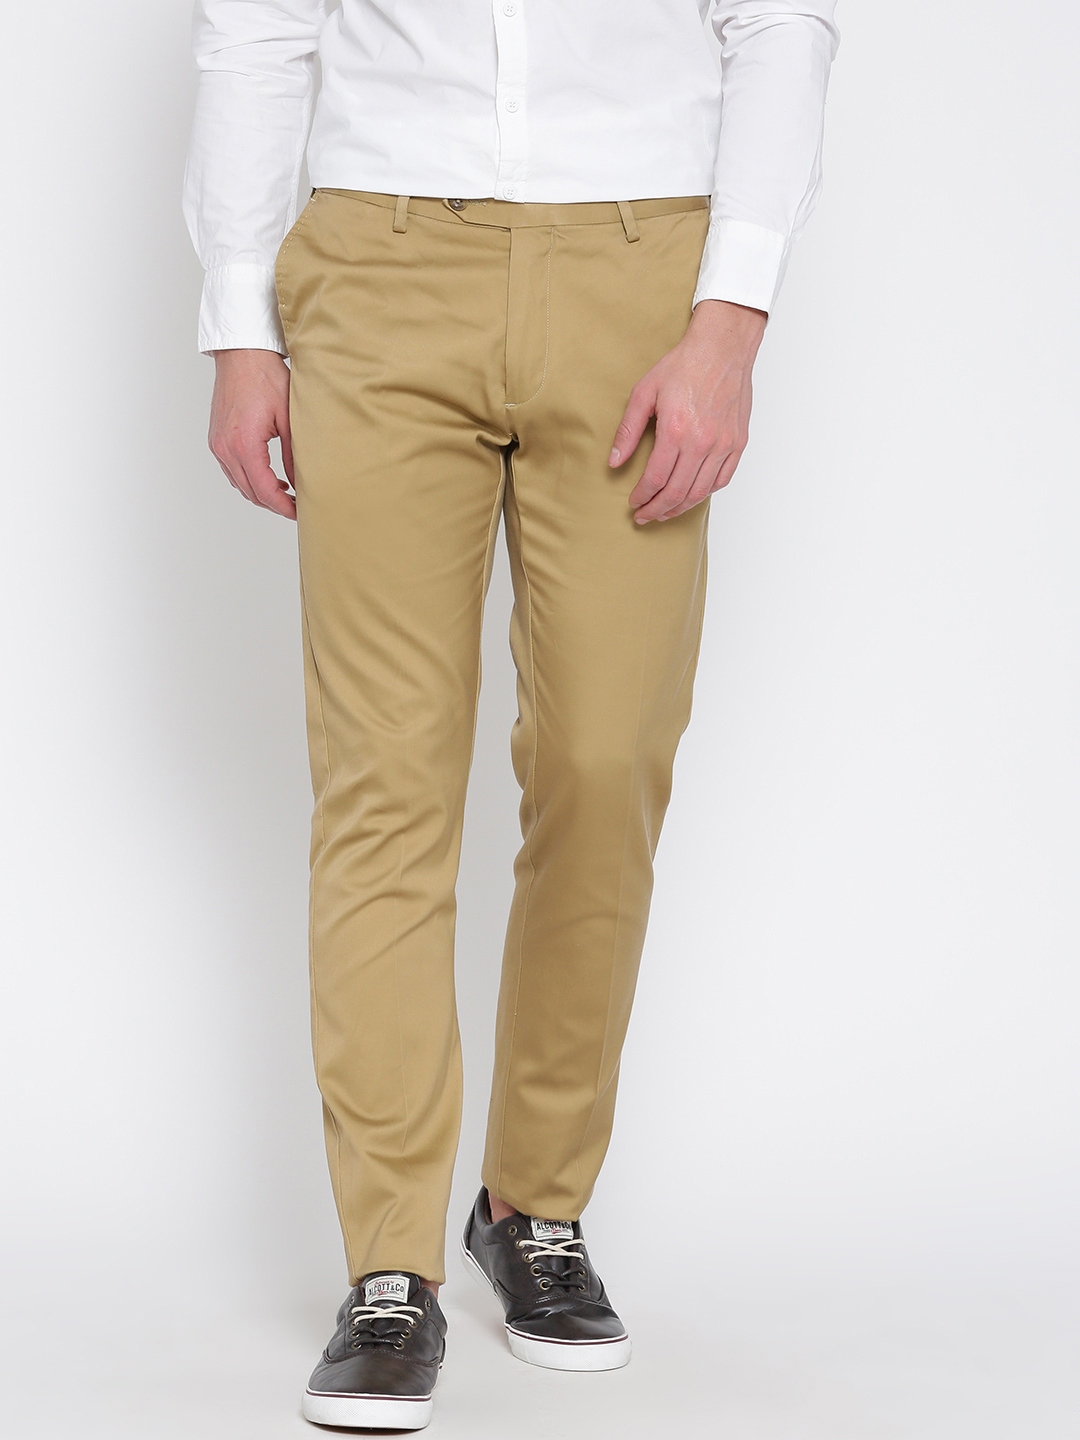 Arrow Sports Casual Trousers  Buy Arrow Sports Men Green Chrysler Slim Fit  Cotton Stretch Solid Casual Trousers Online  Nykaa Fashion